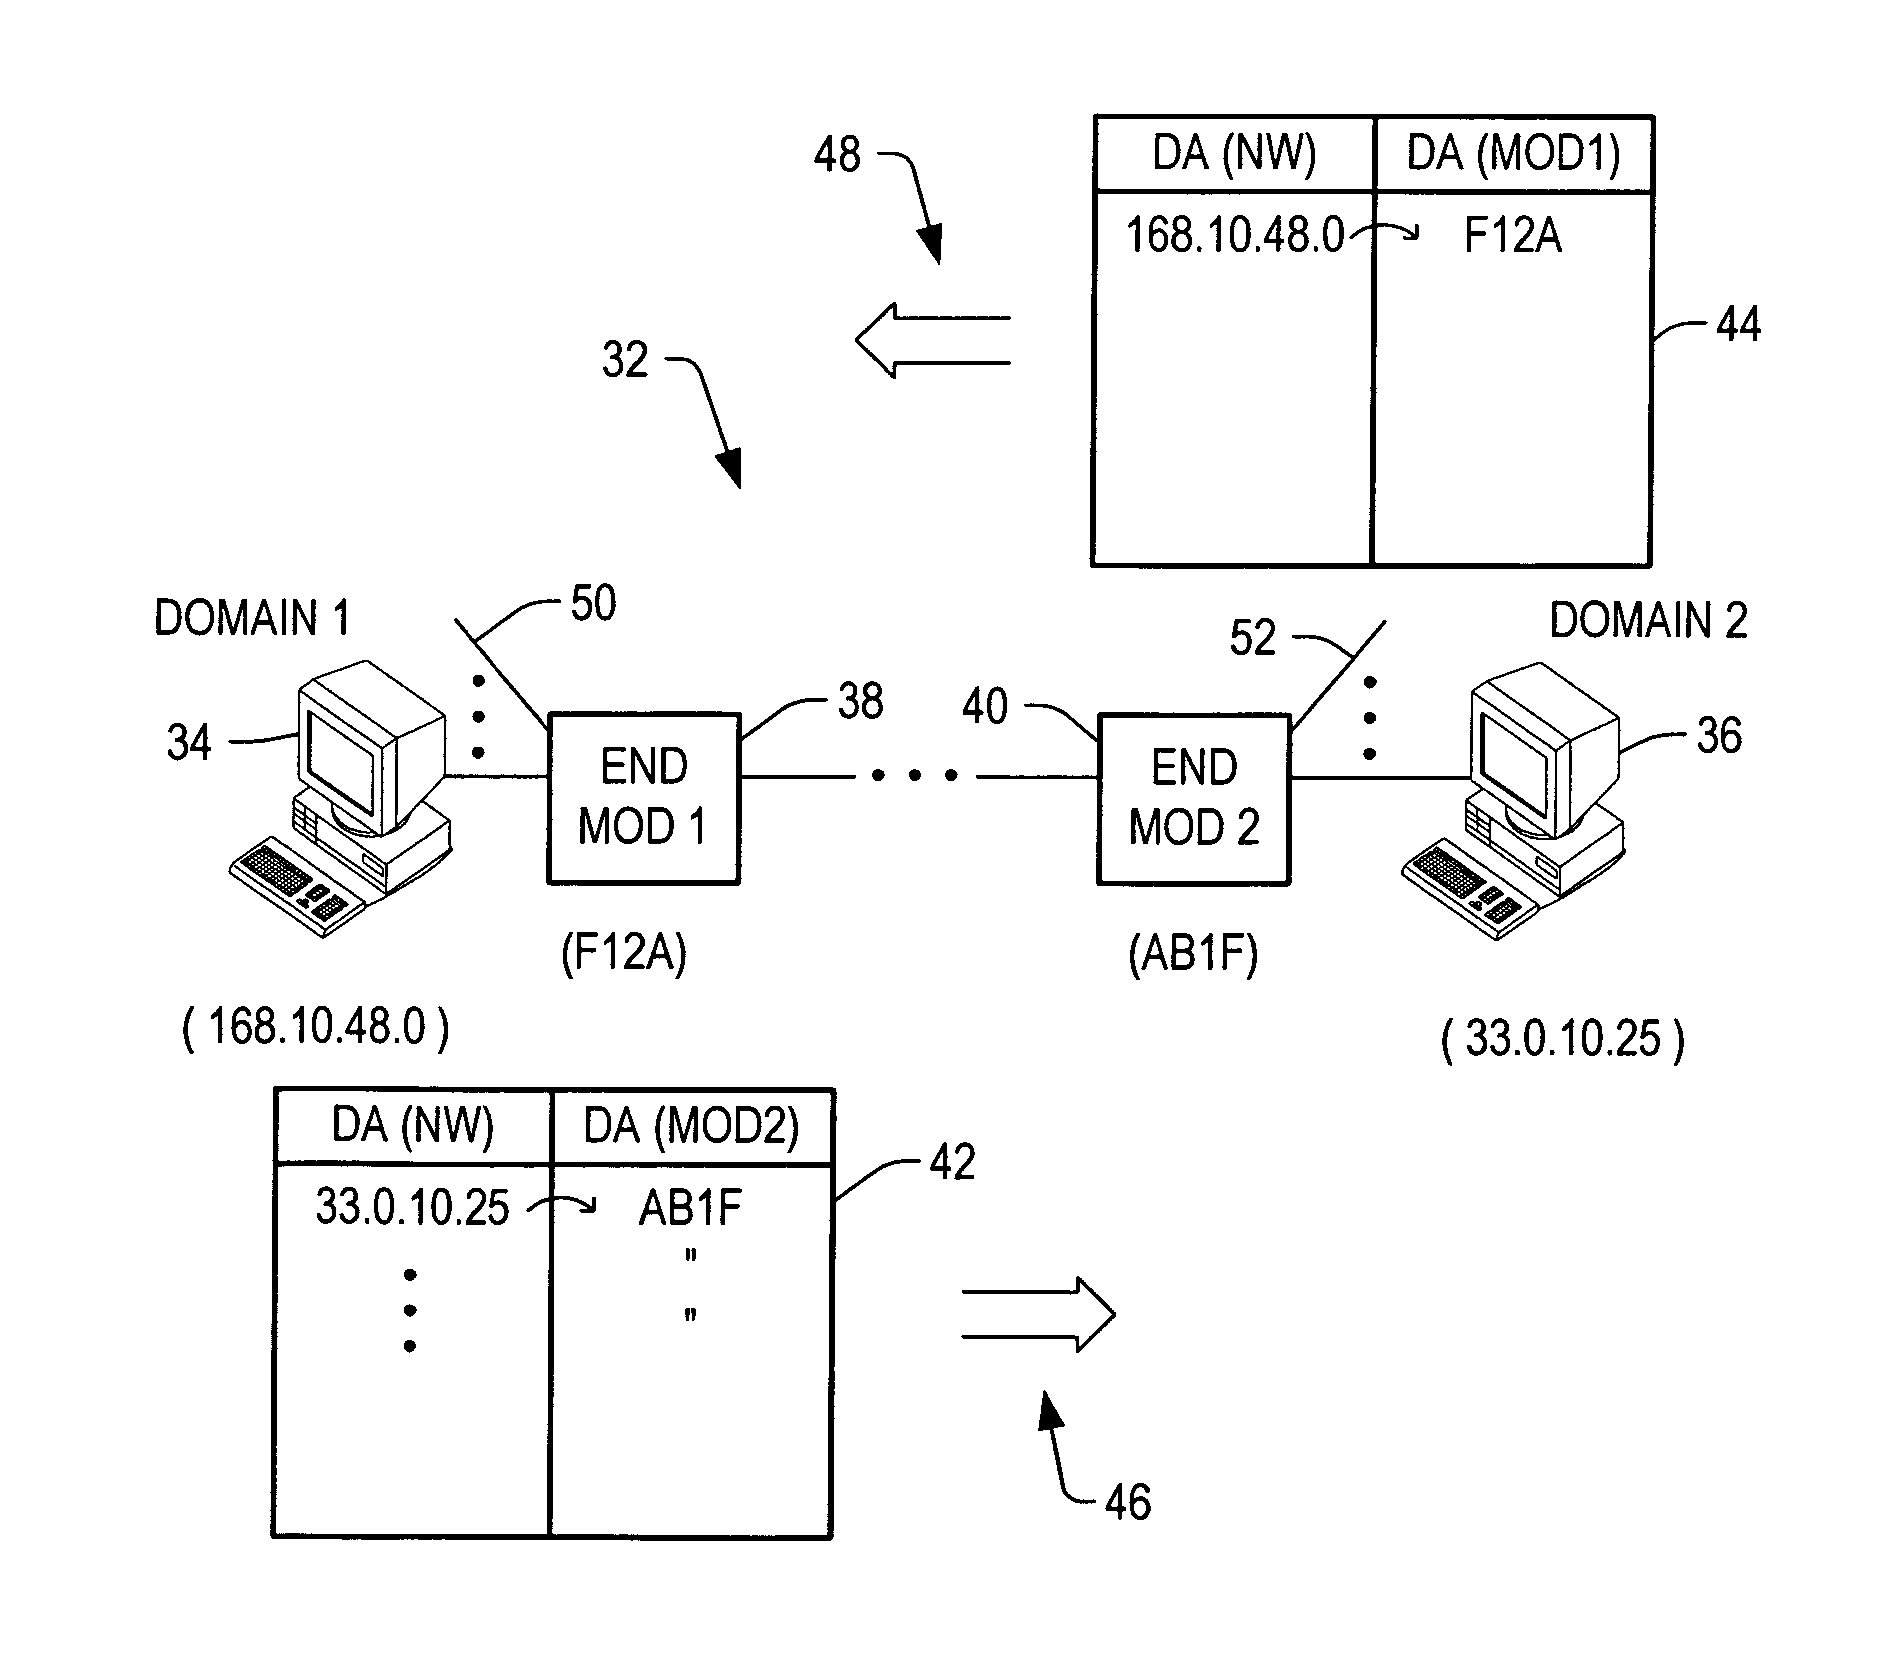 Apparatus, system, and method for routing data to and from a host that is moved from one location on a communication system to another location on the communication system